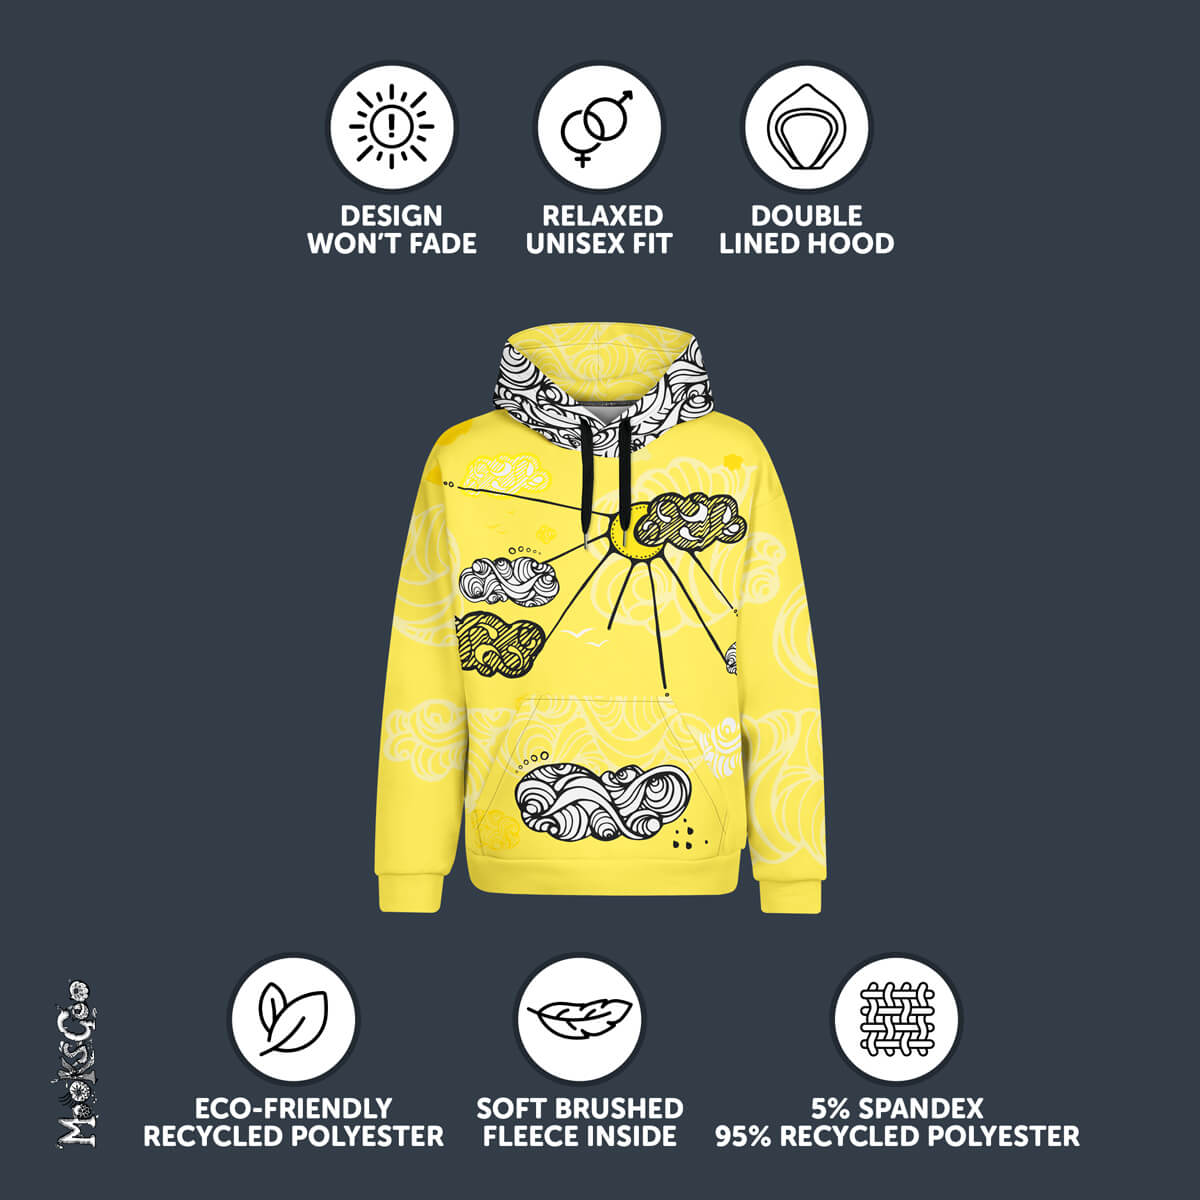 Benefits of the Sunny Sunshine all over print hoodie, proud of the eco-friendly material using 95% recycled polyester. Hoodie has a bright yellow background, black and white clouds, with a quirky design. Illustrated and designed by MooksGoo